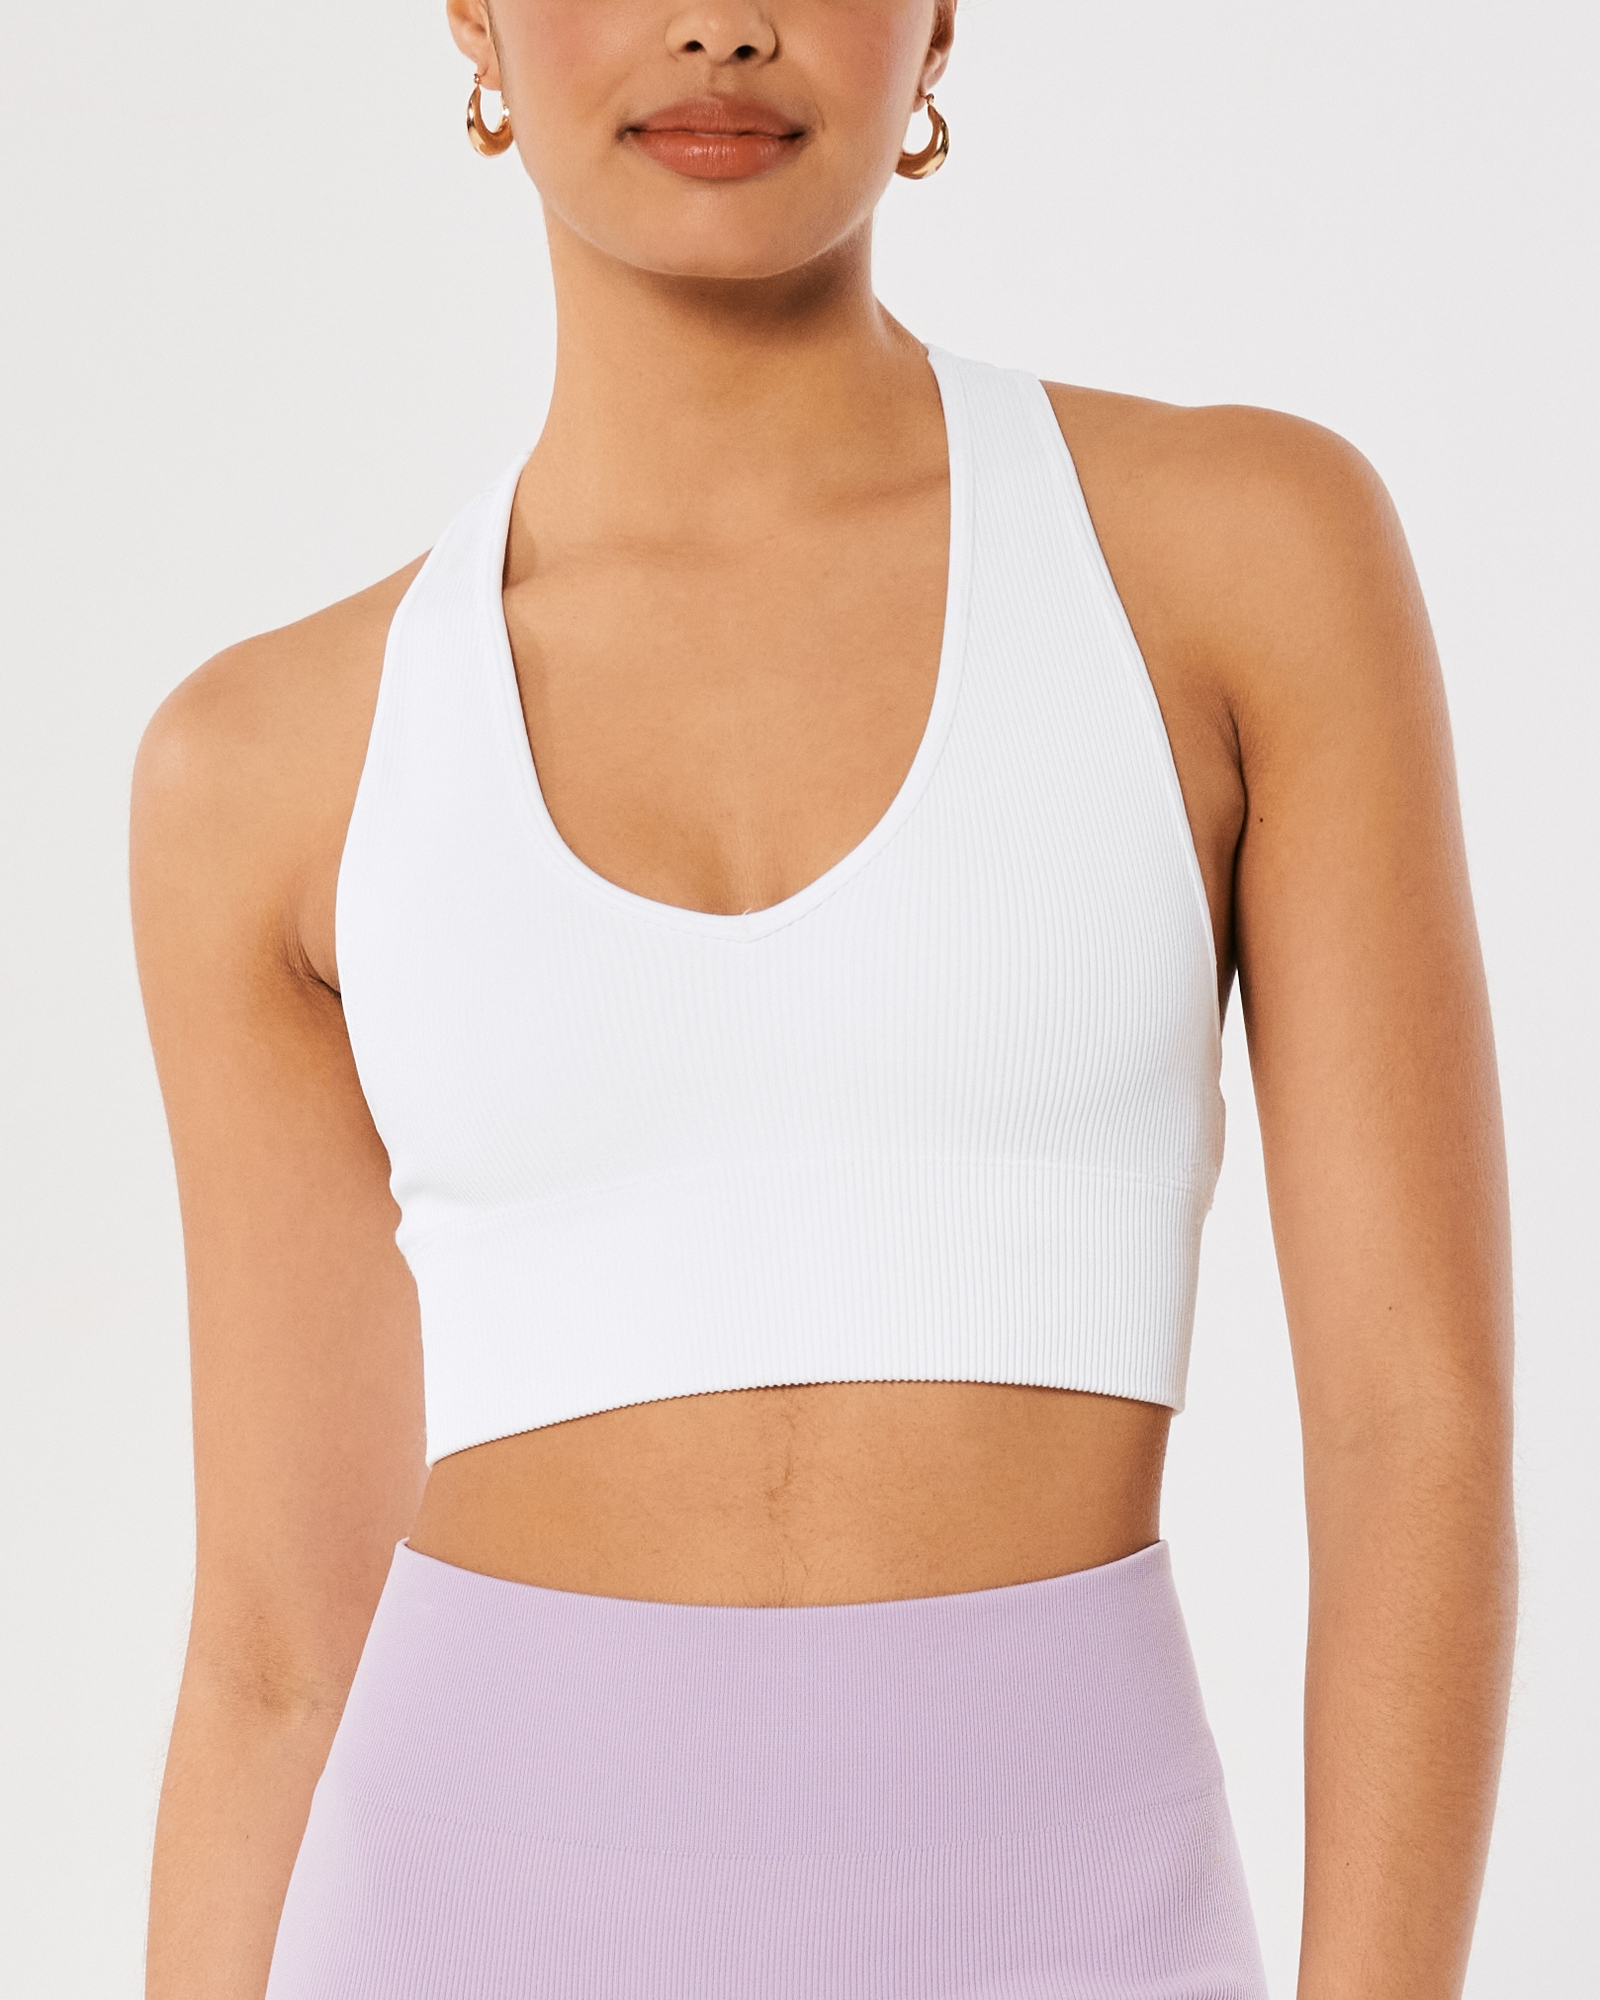 Women's Gilly Hicks Active Seamless Ribbed Plunge Sports Bra